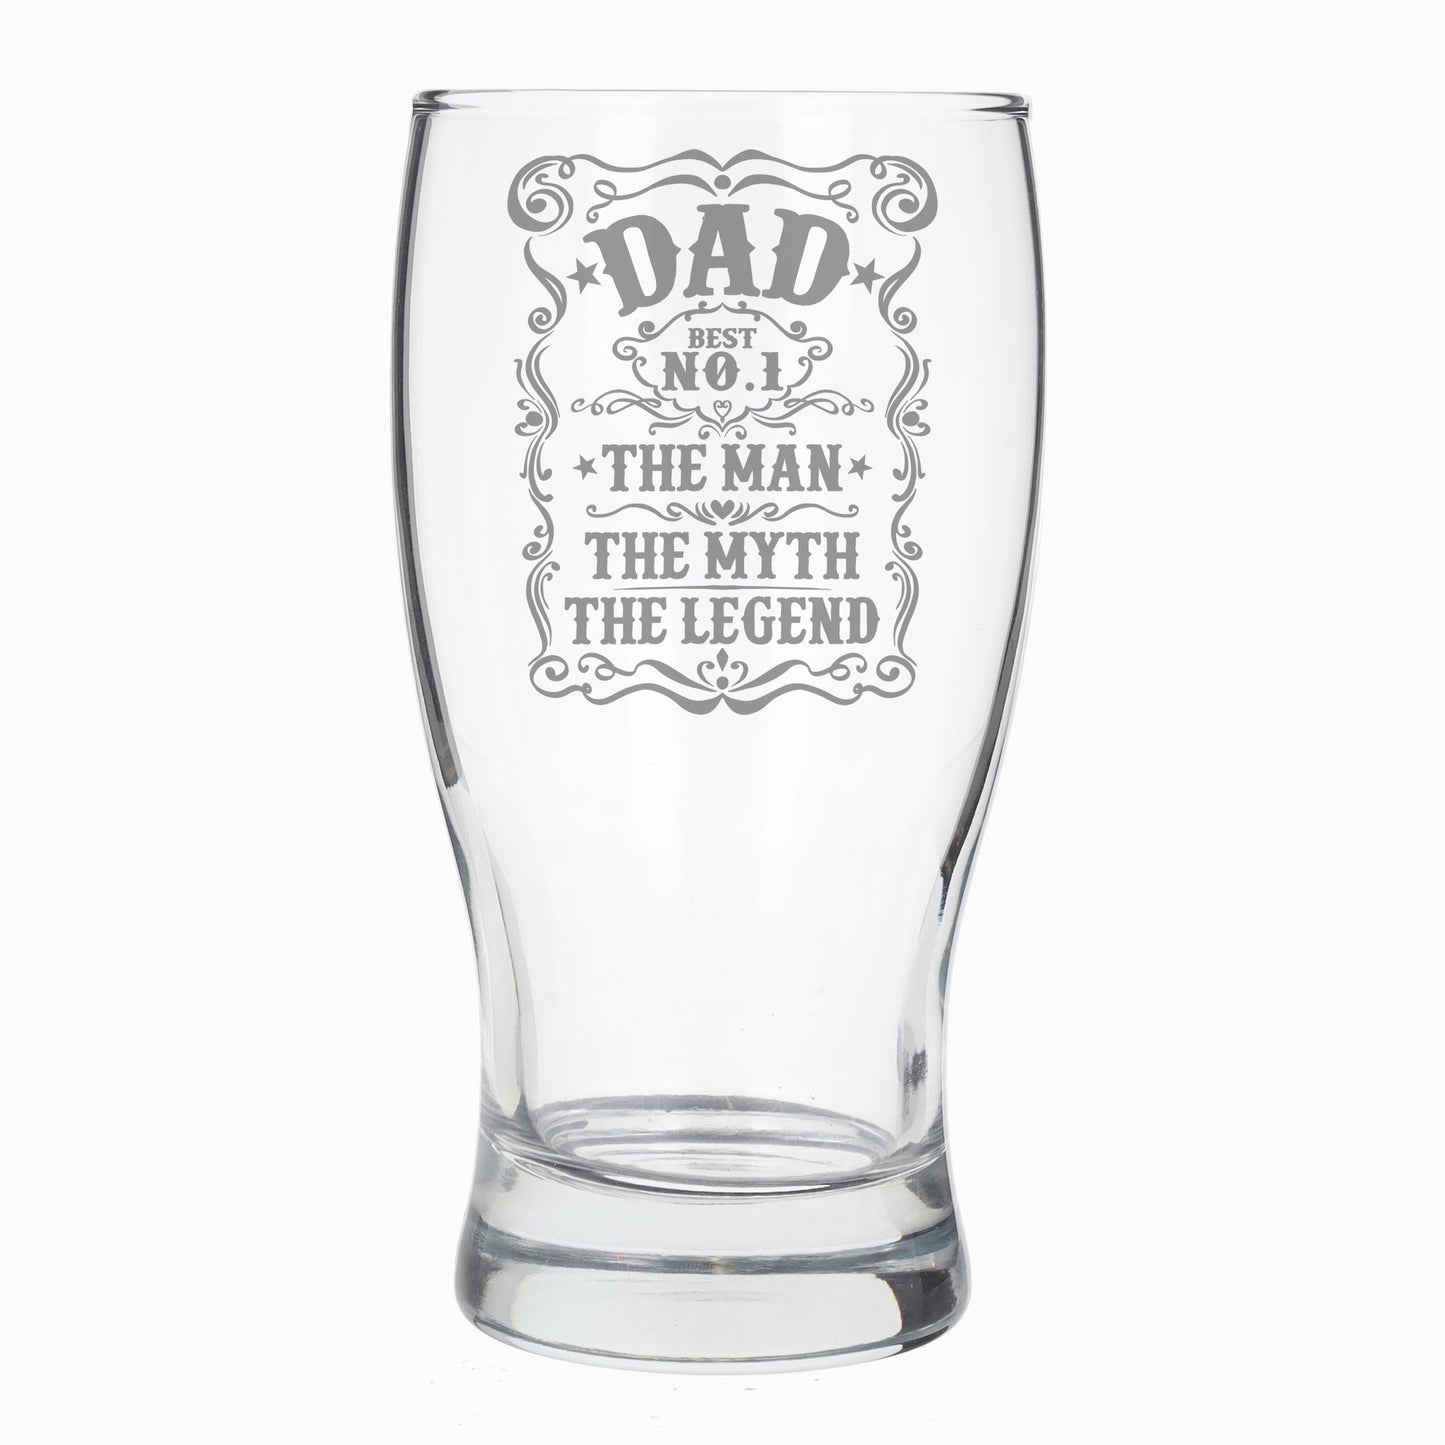 Dad The Man The Myth The Legend Engraved Beer Pint Glass and/or Coaster Set  - Always Looking Good - Beer Glass Only  